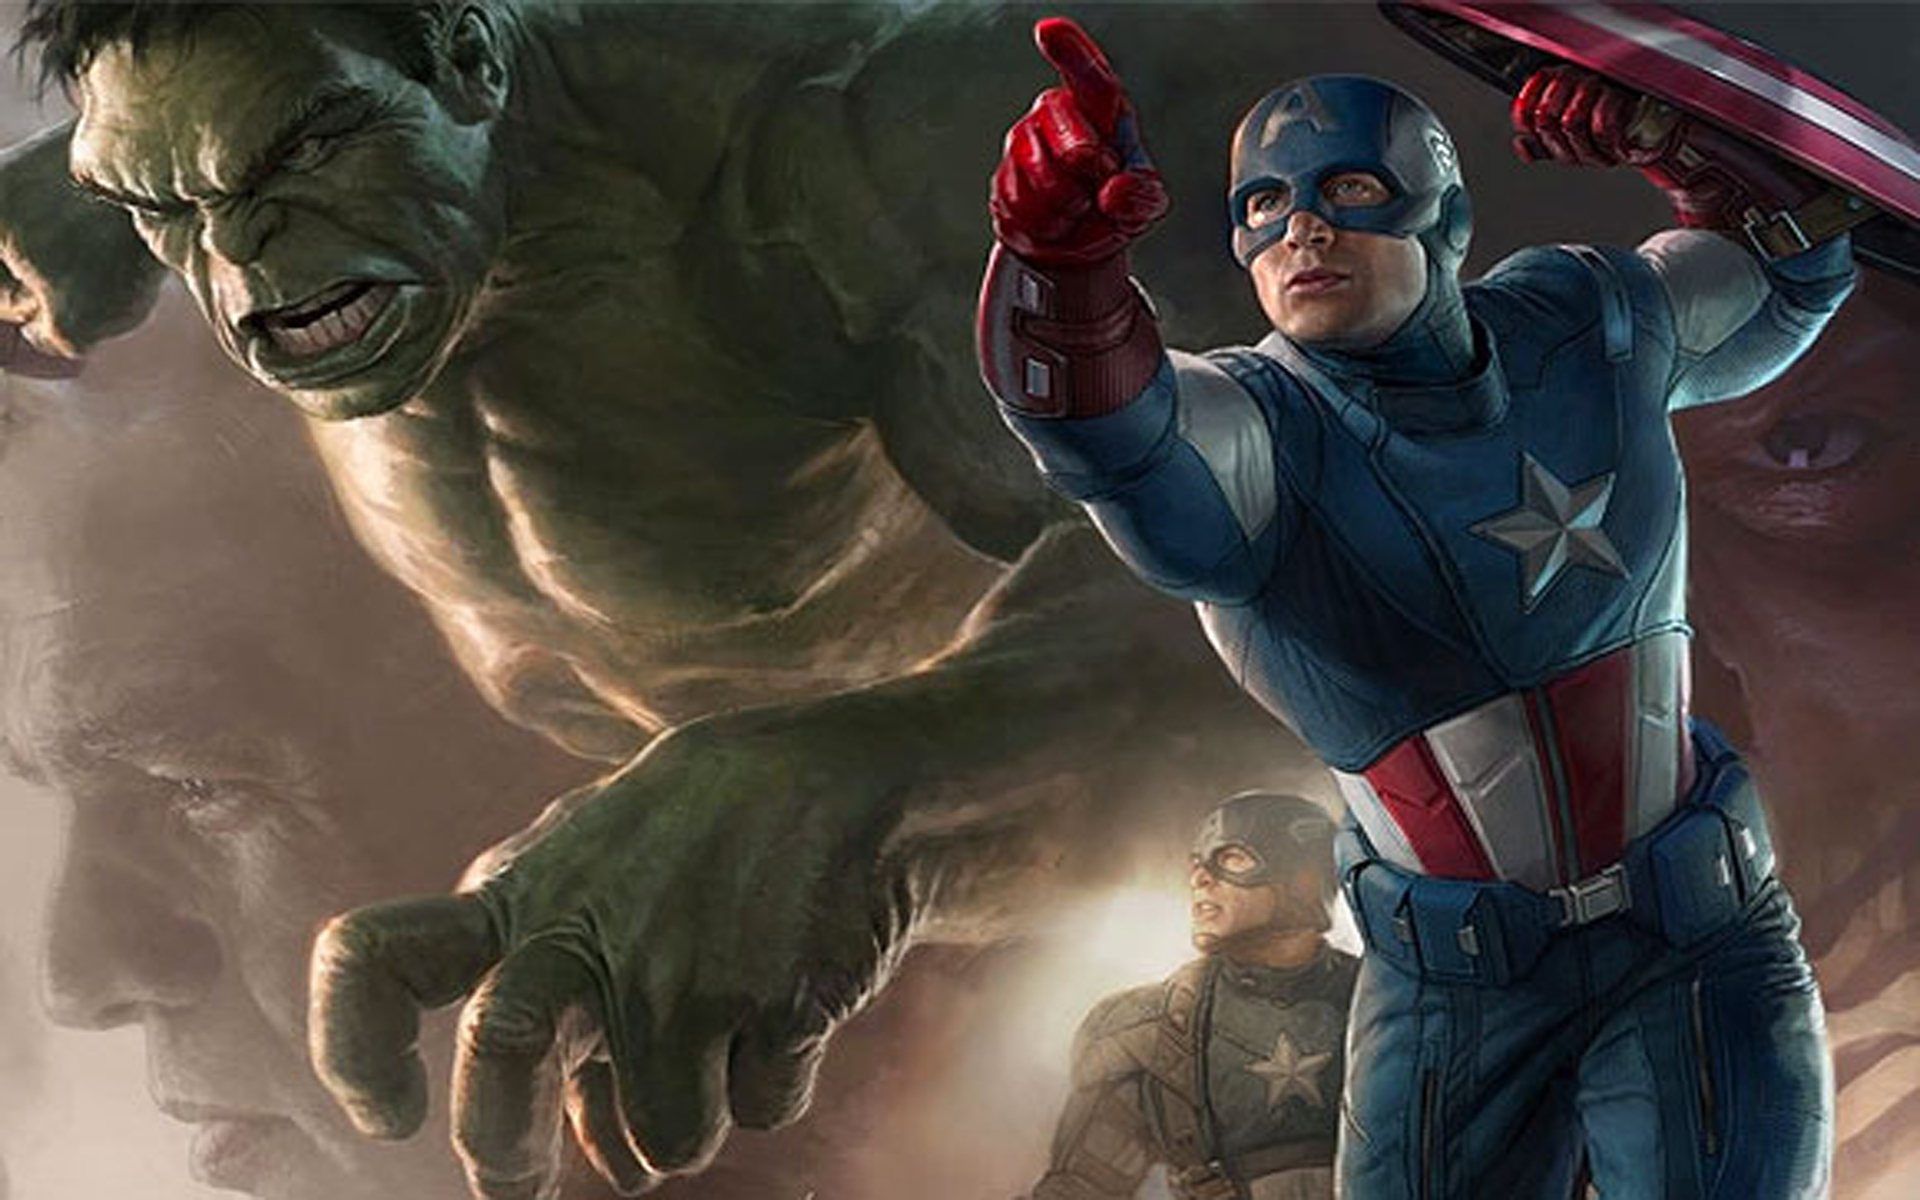 Unused Character Portraits From The Avengers Captain America And Hulk Deskt...